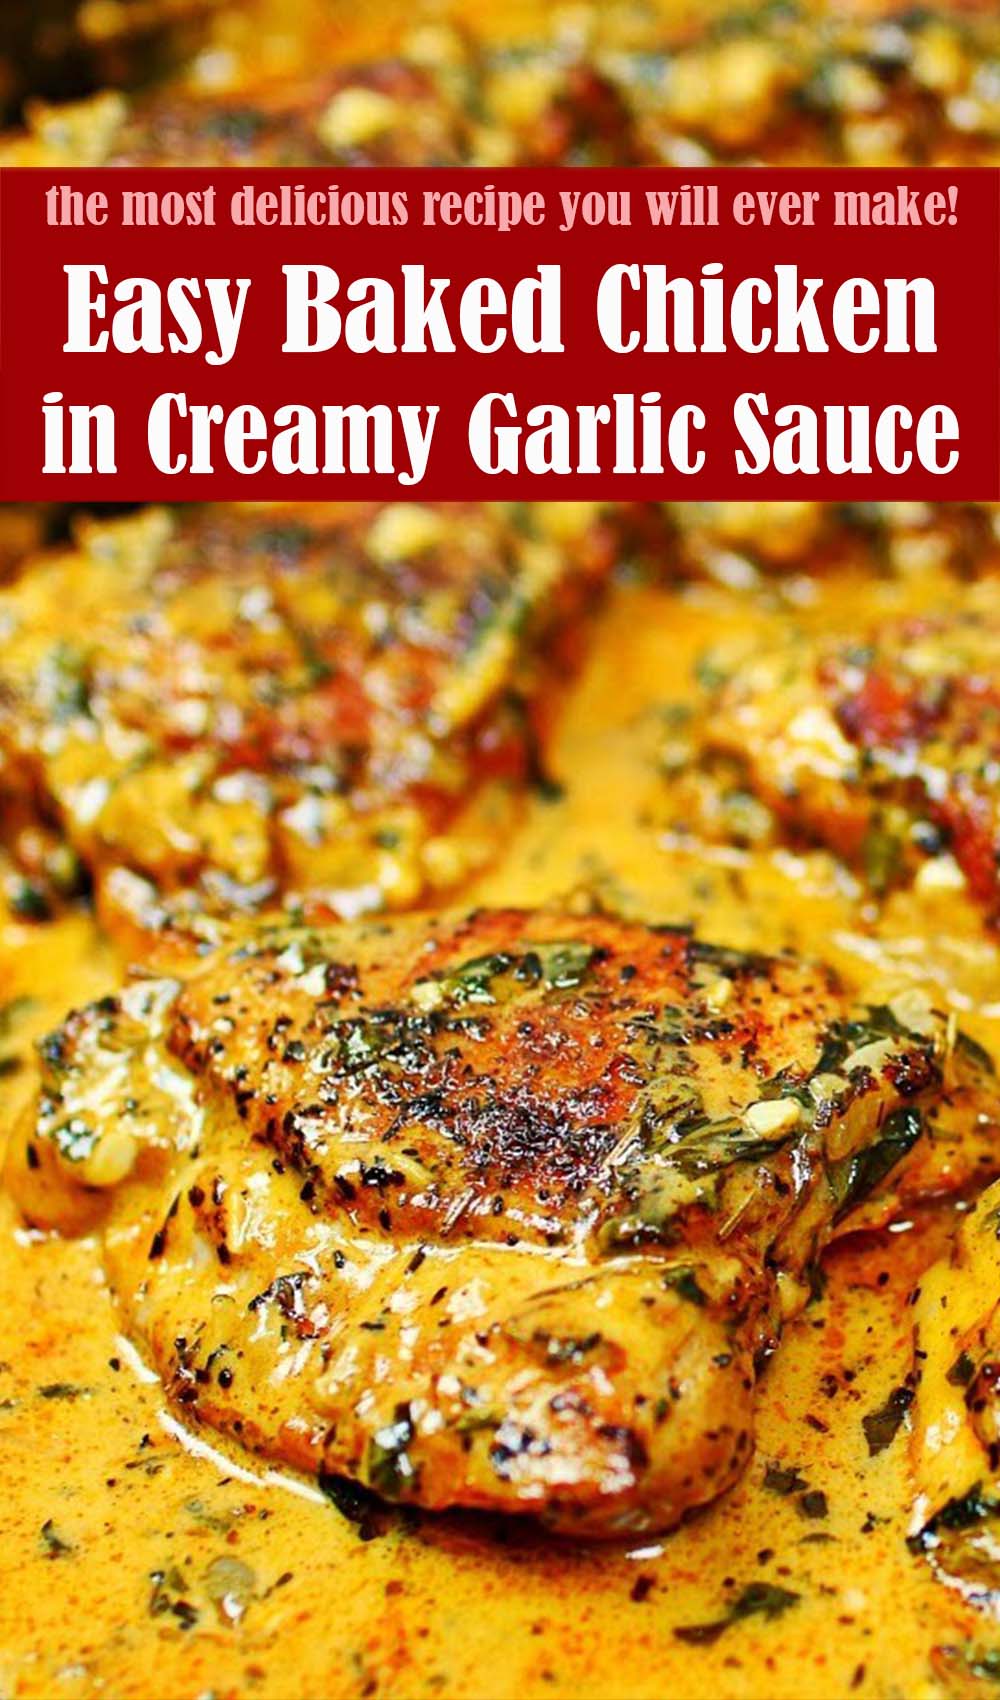 Easy Baked Chicken in Creamy Garlic Sauce with VIDEO | Lindsy's Kitchen